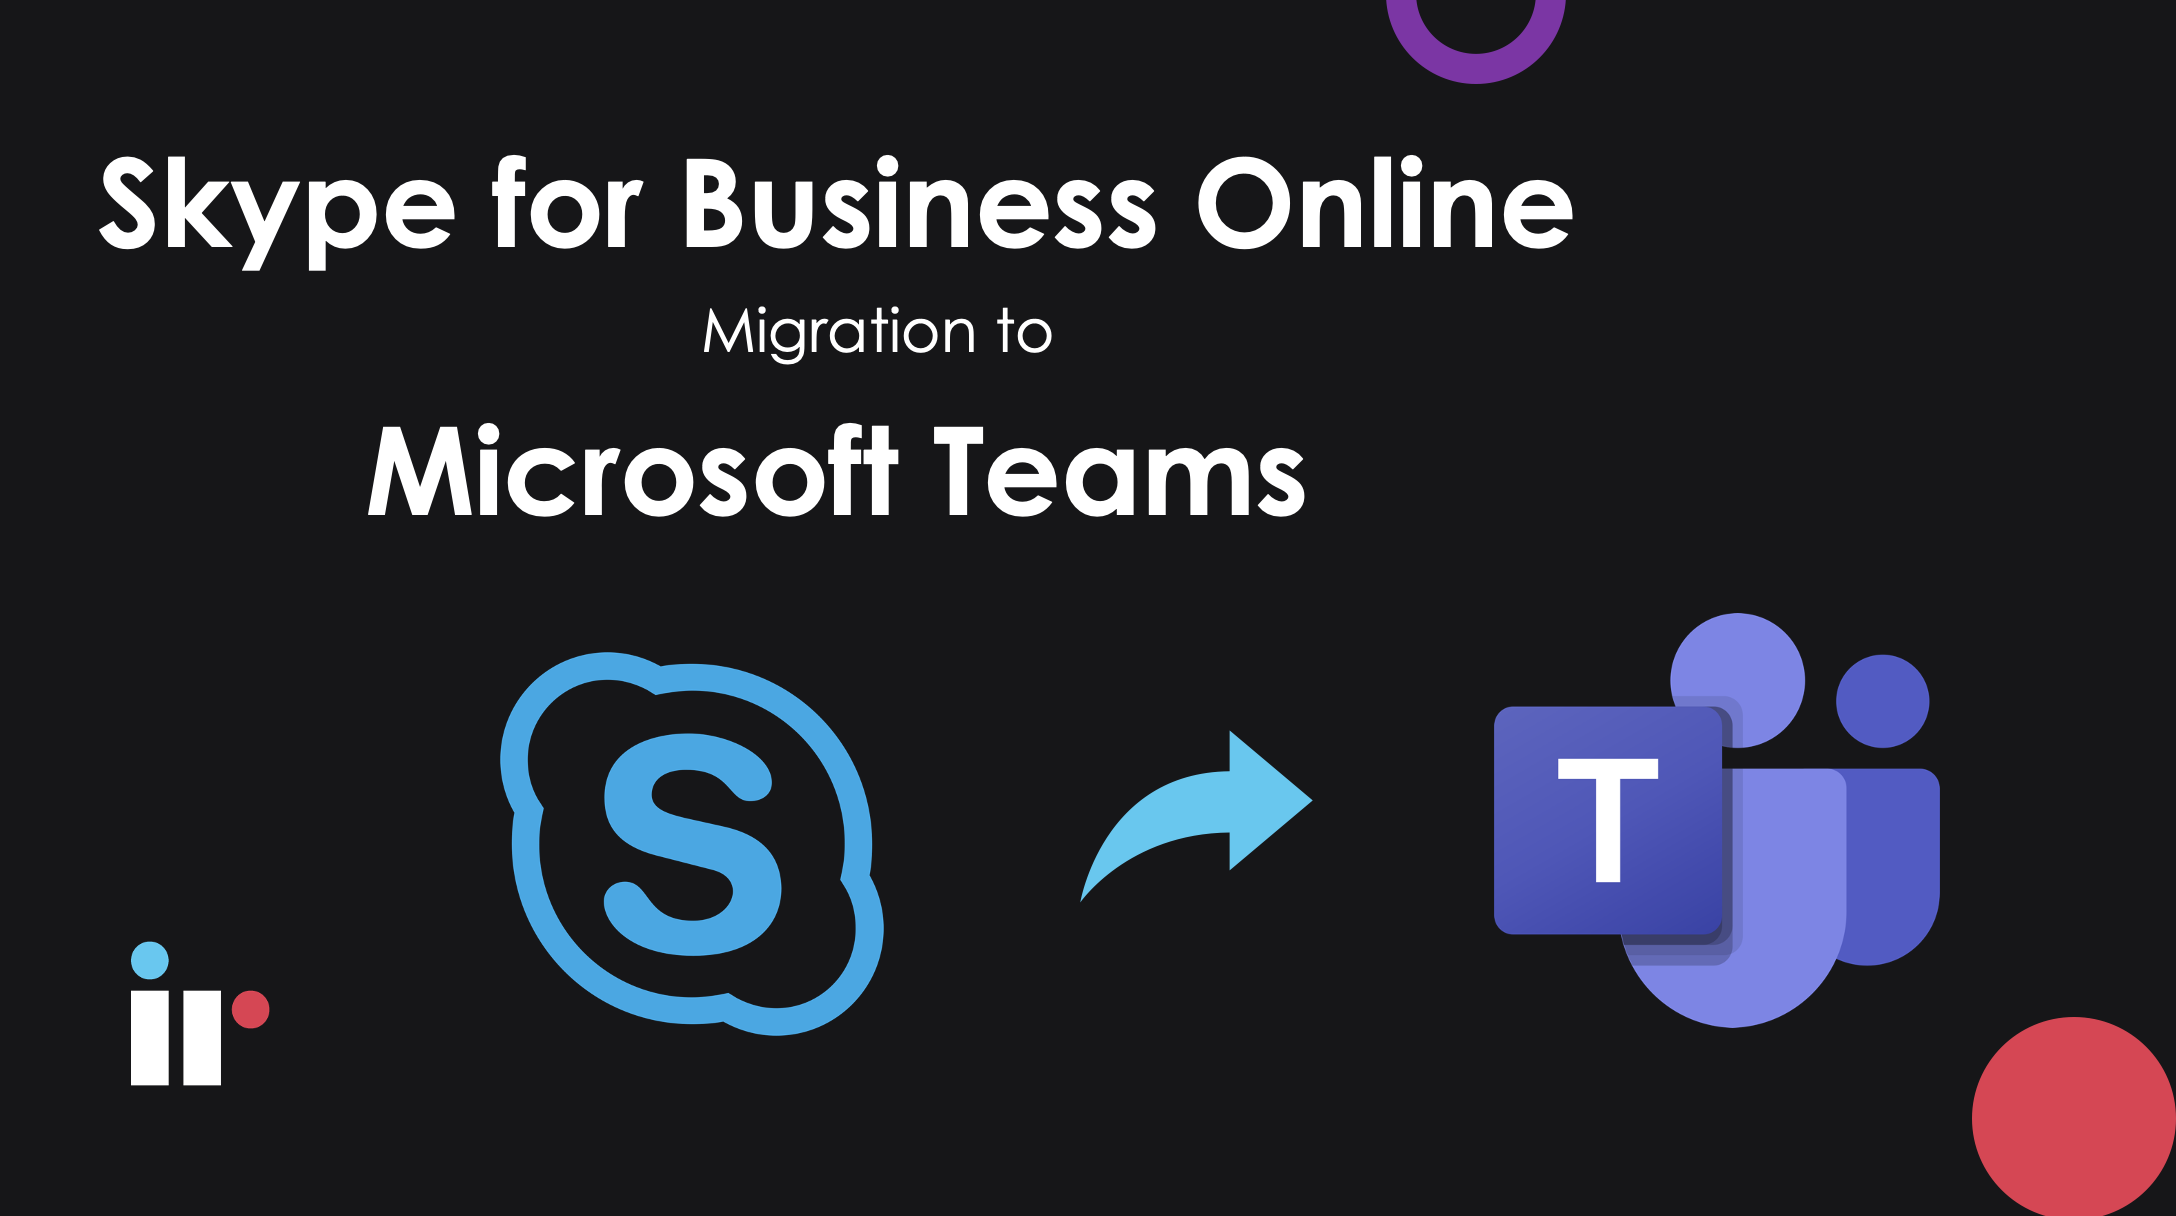 Skype for Business Online Migration to Microsoft Teams